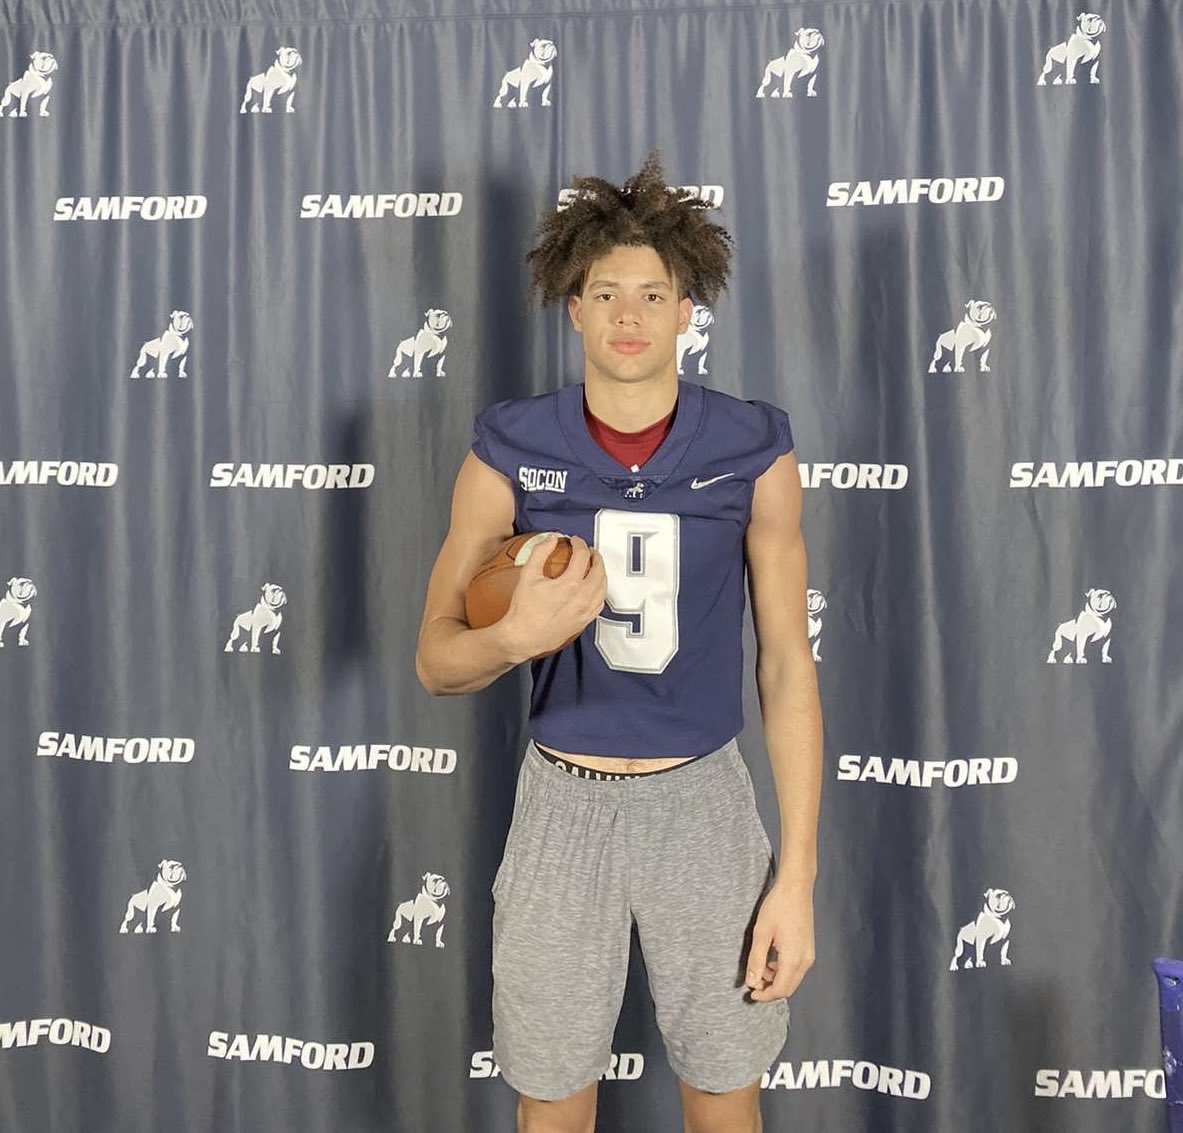 Had a great time at @SamfordFootball today🐶 #HatchAttack 

@HallTechSports1 @GWildcatsfball @CoachBBognar